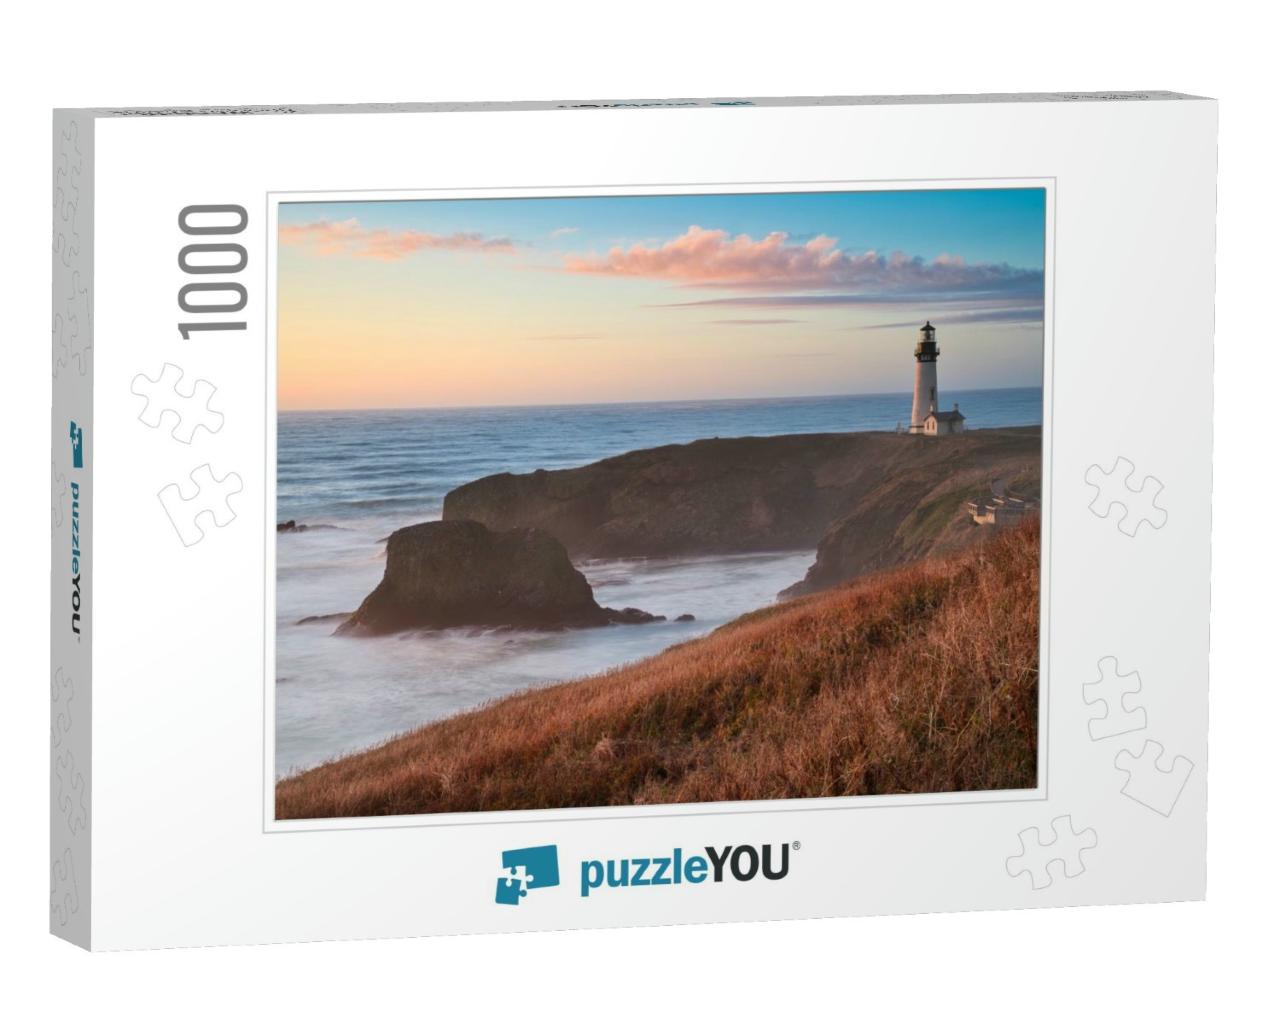 Photo of the Yaquina Head Lighthouse in Oregon At the Sun... Jigsaw Puzzle with 1000 pieces